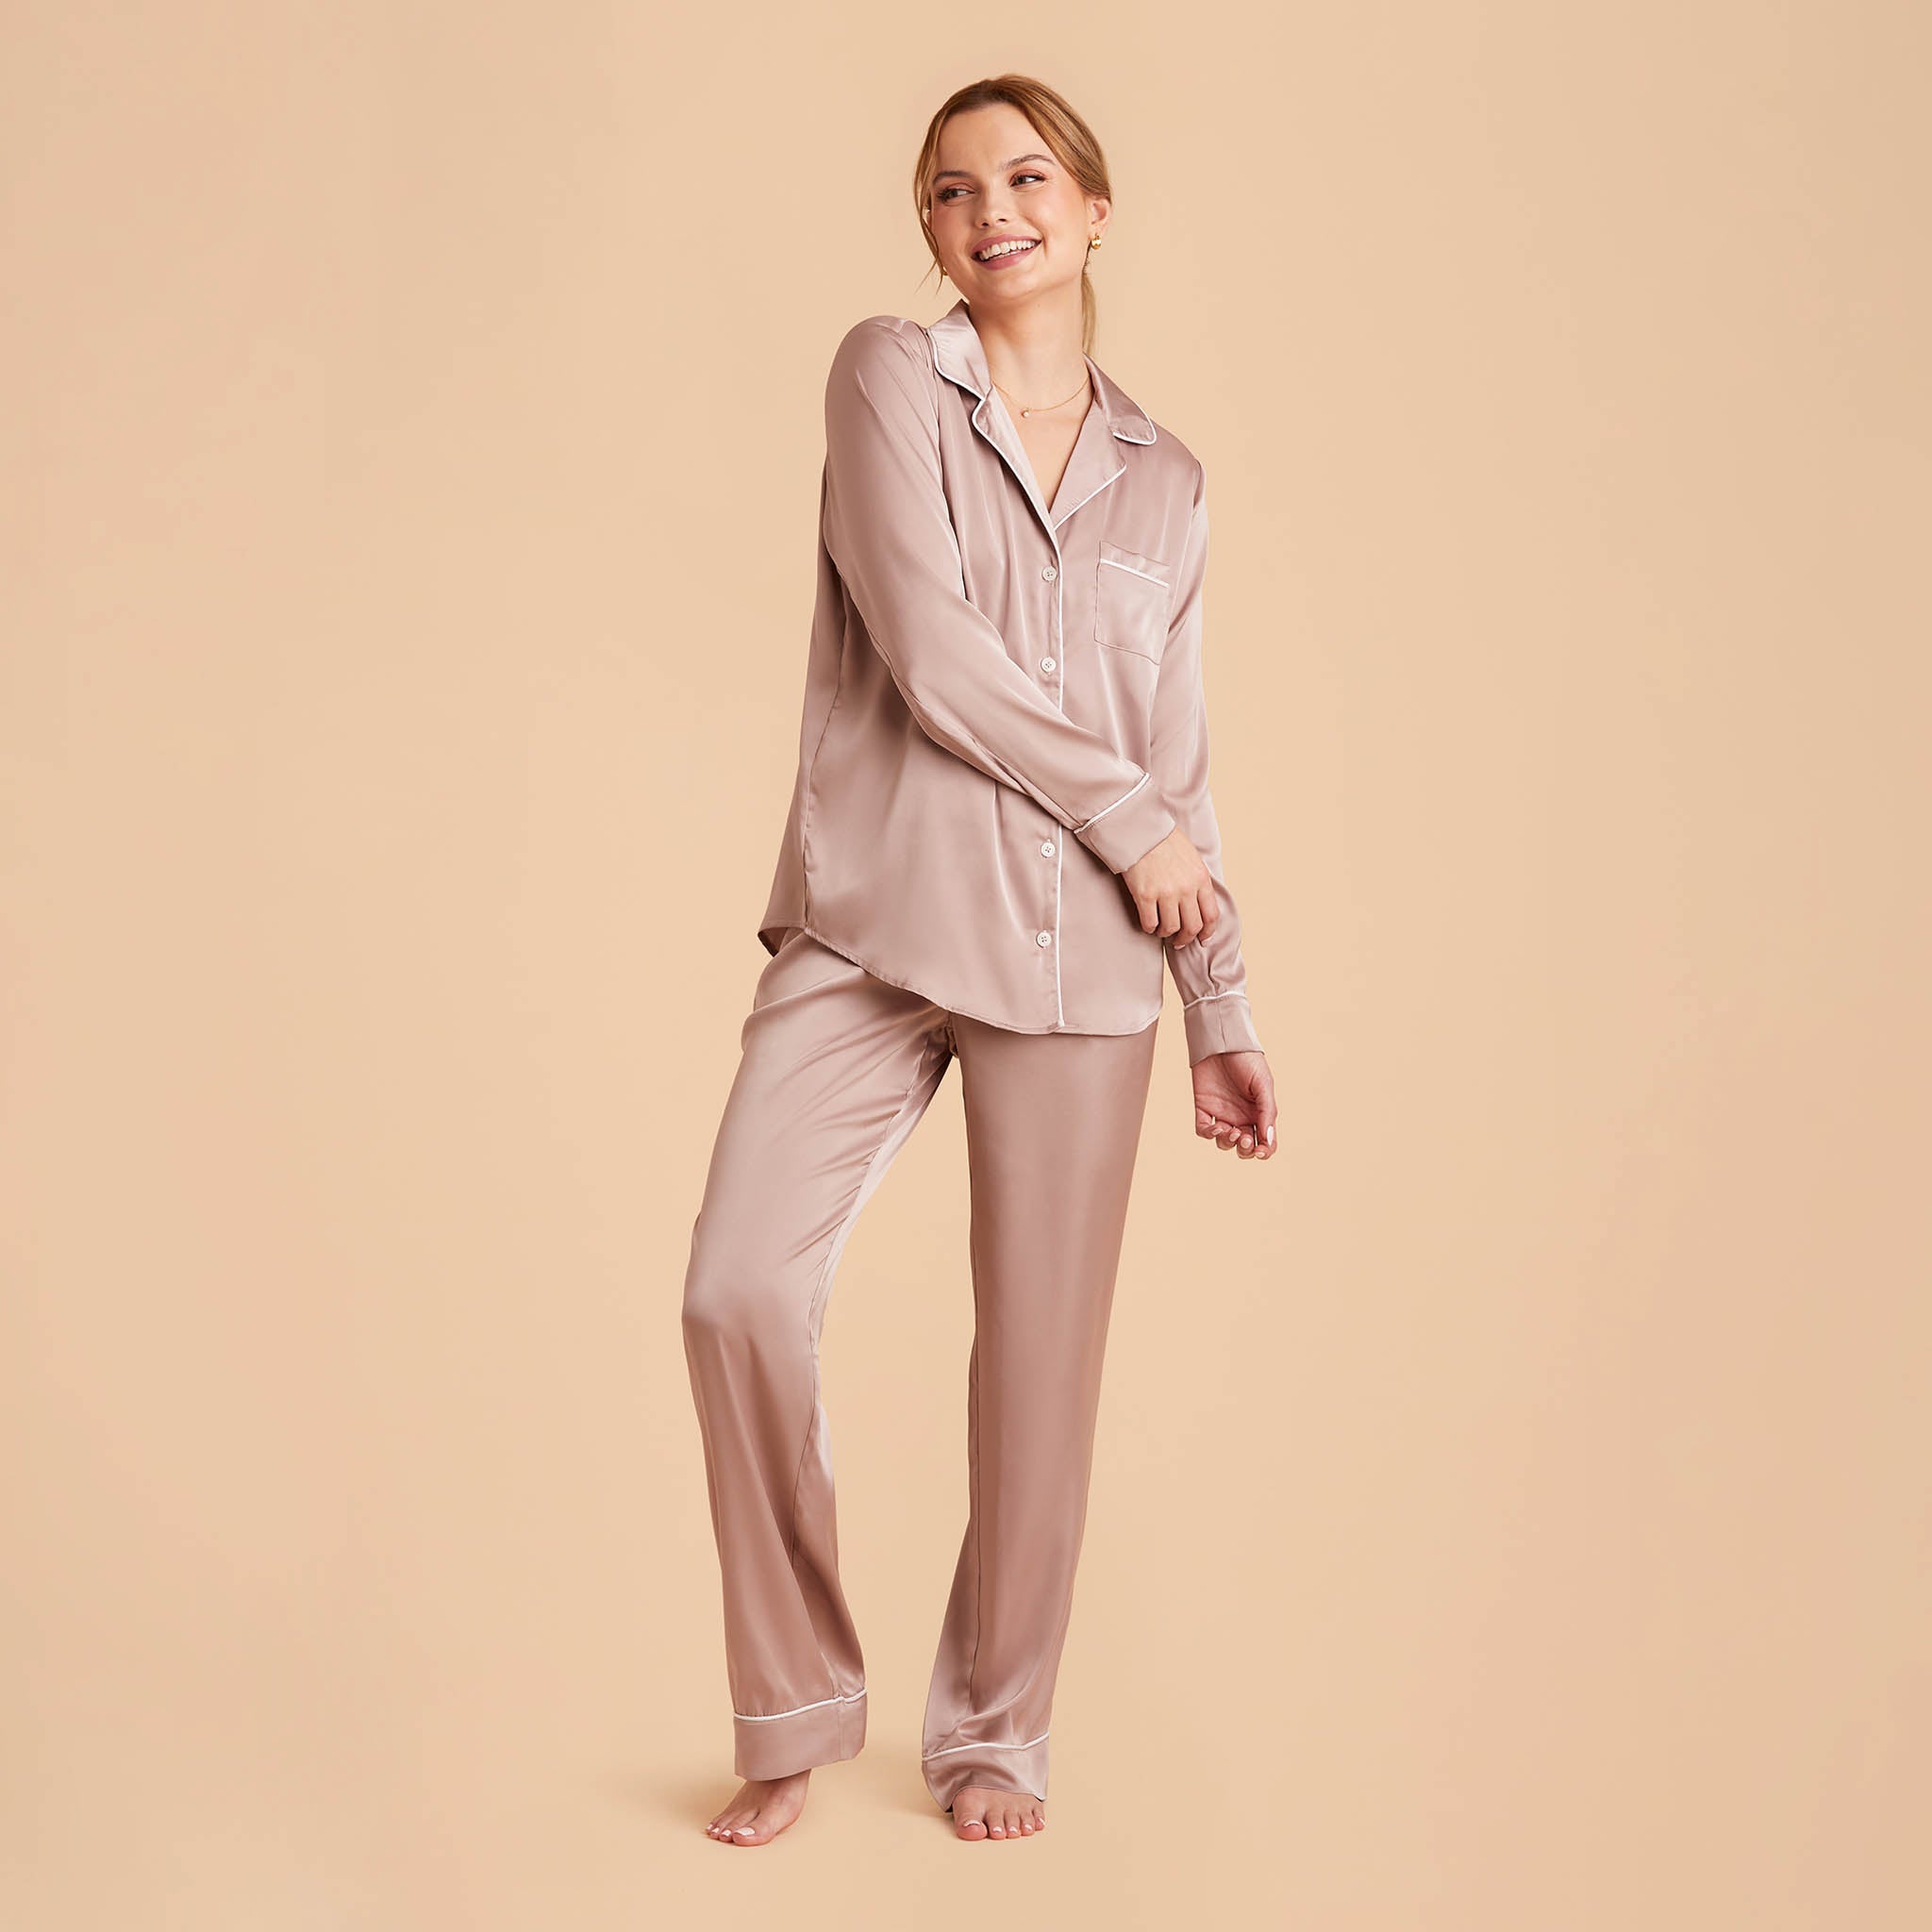 Jonny Satin Long Sleeve Pajama Top With White Piping in mauve taupe, front view